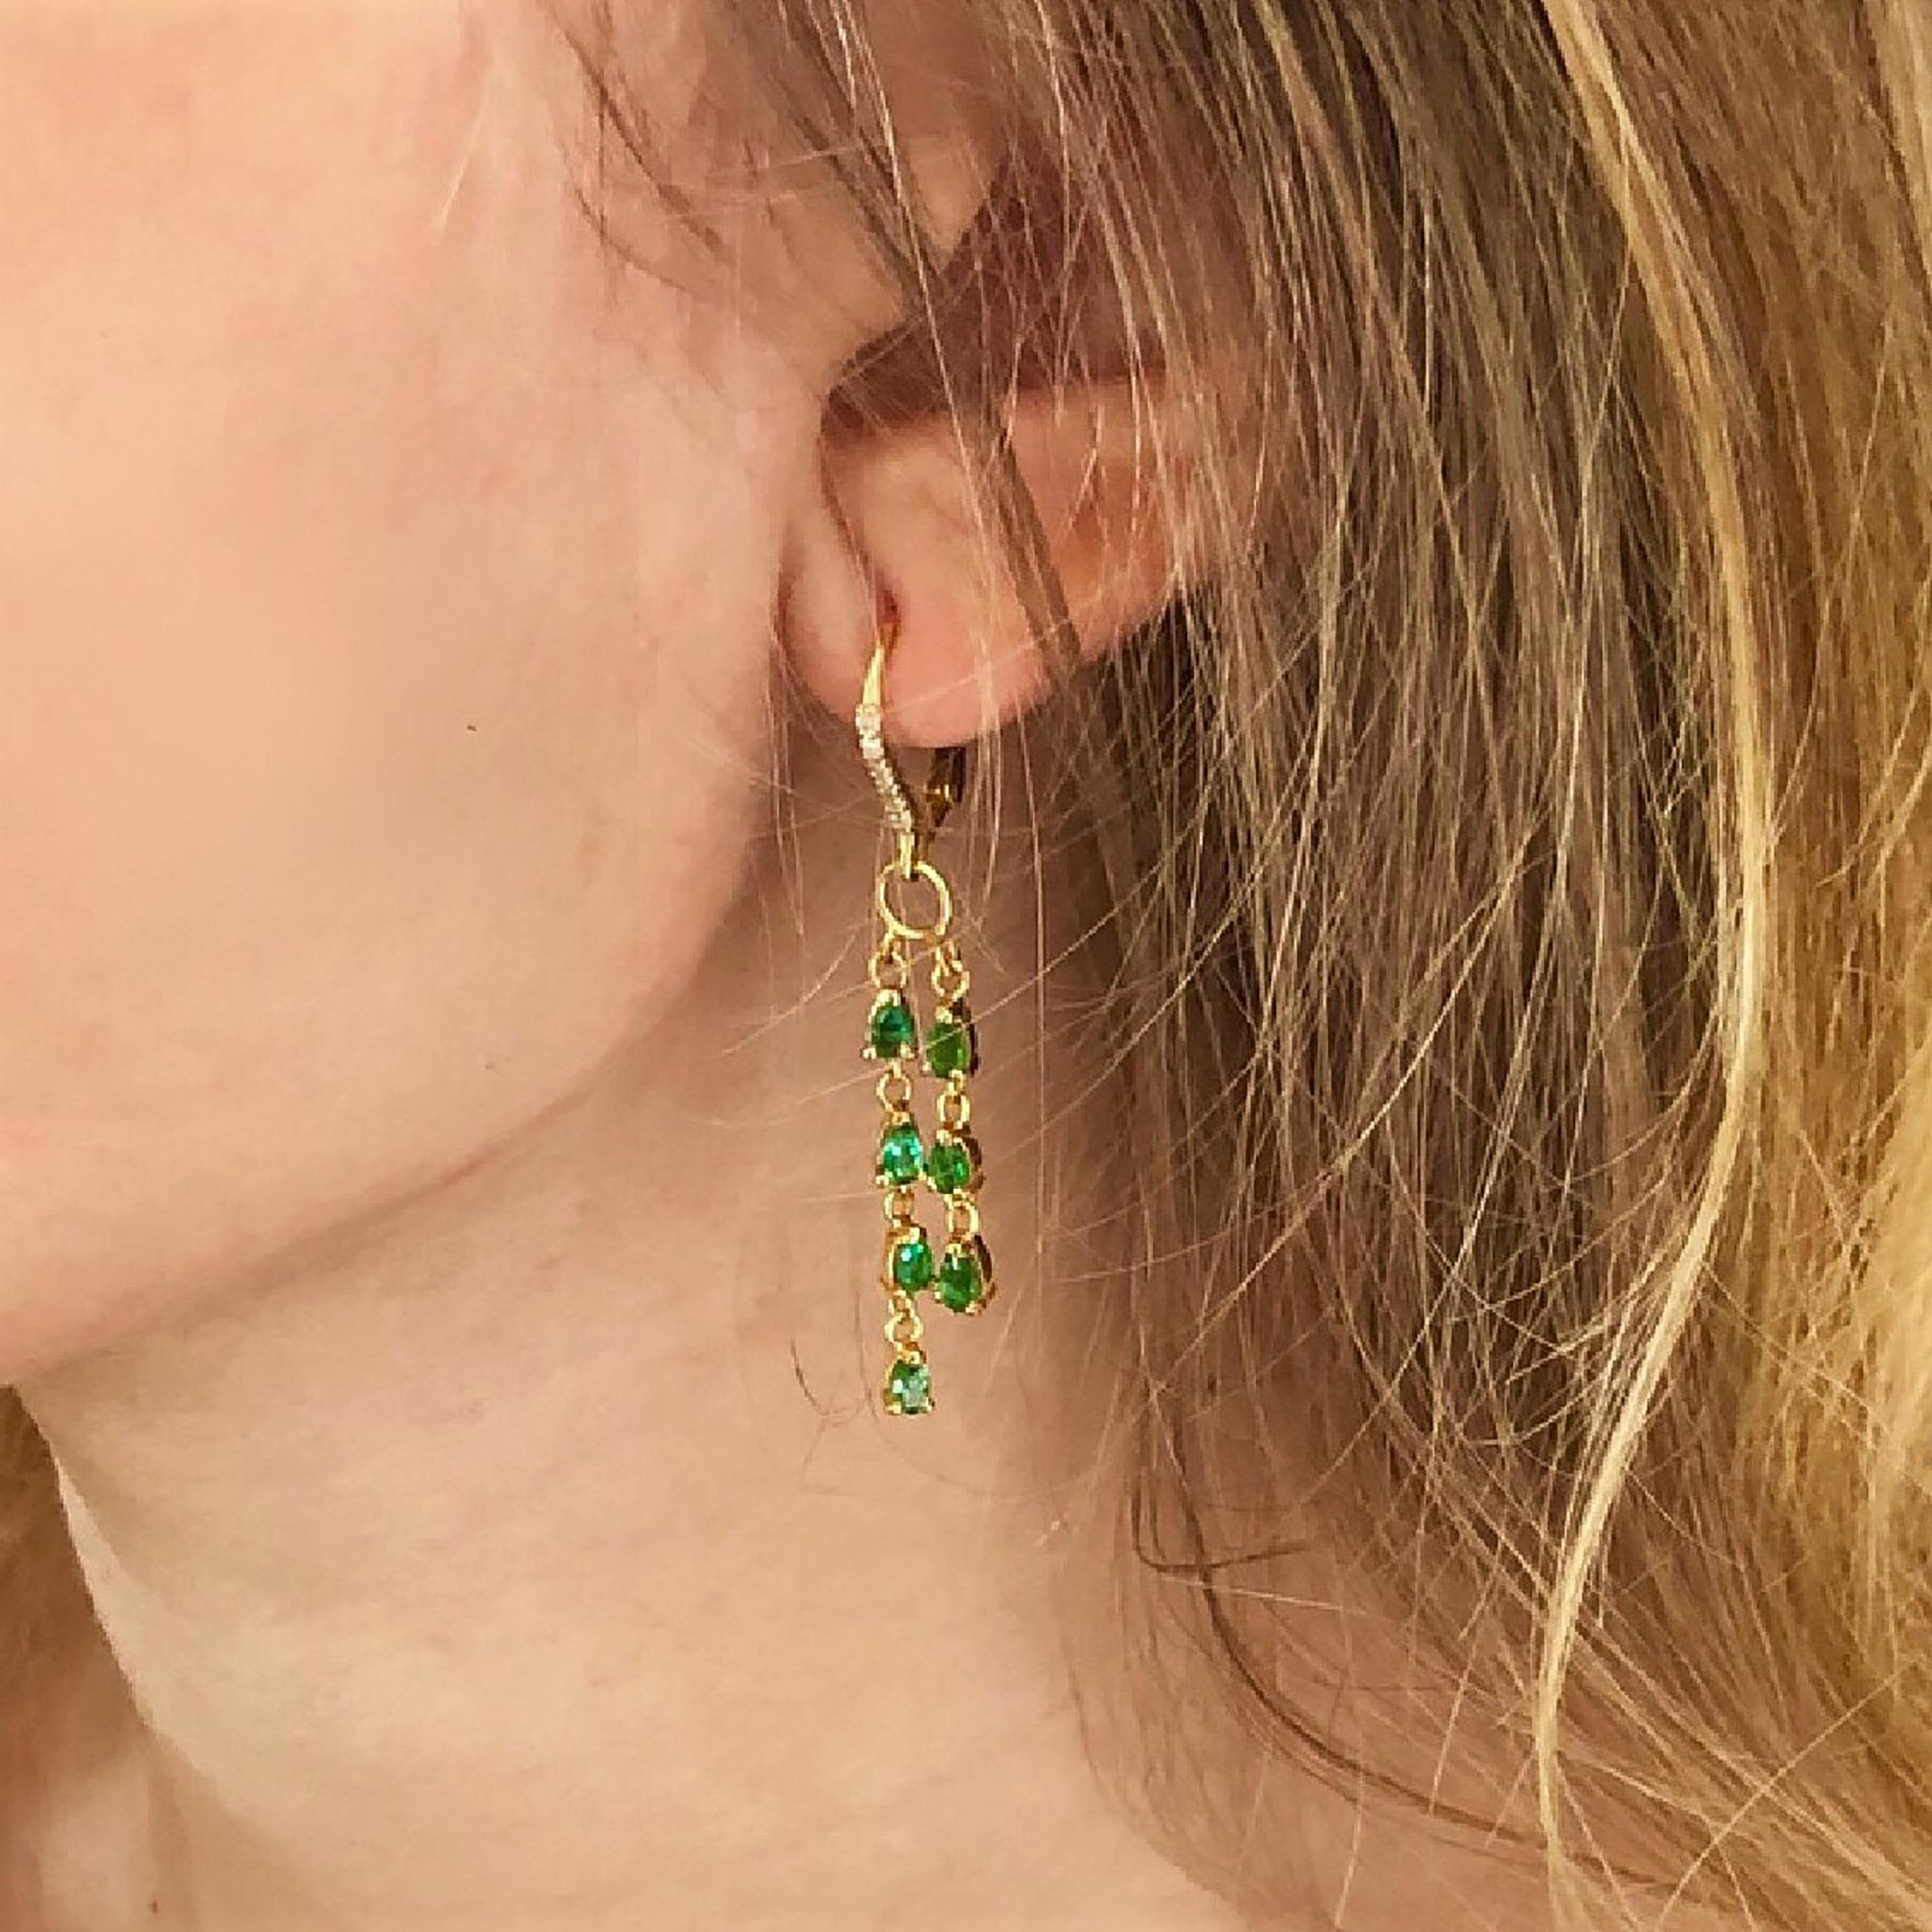 Fourteen karats yellow gold diamond and emerald hoop drop earrings 
Earrings are 1.75 inches long
Fourteen pear Shape emerald weighing 3.50 carat
Diamond weighing 0.25 carat 
Emerald quality bright and vivid green
New Earrings
Handmade in the